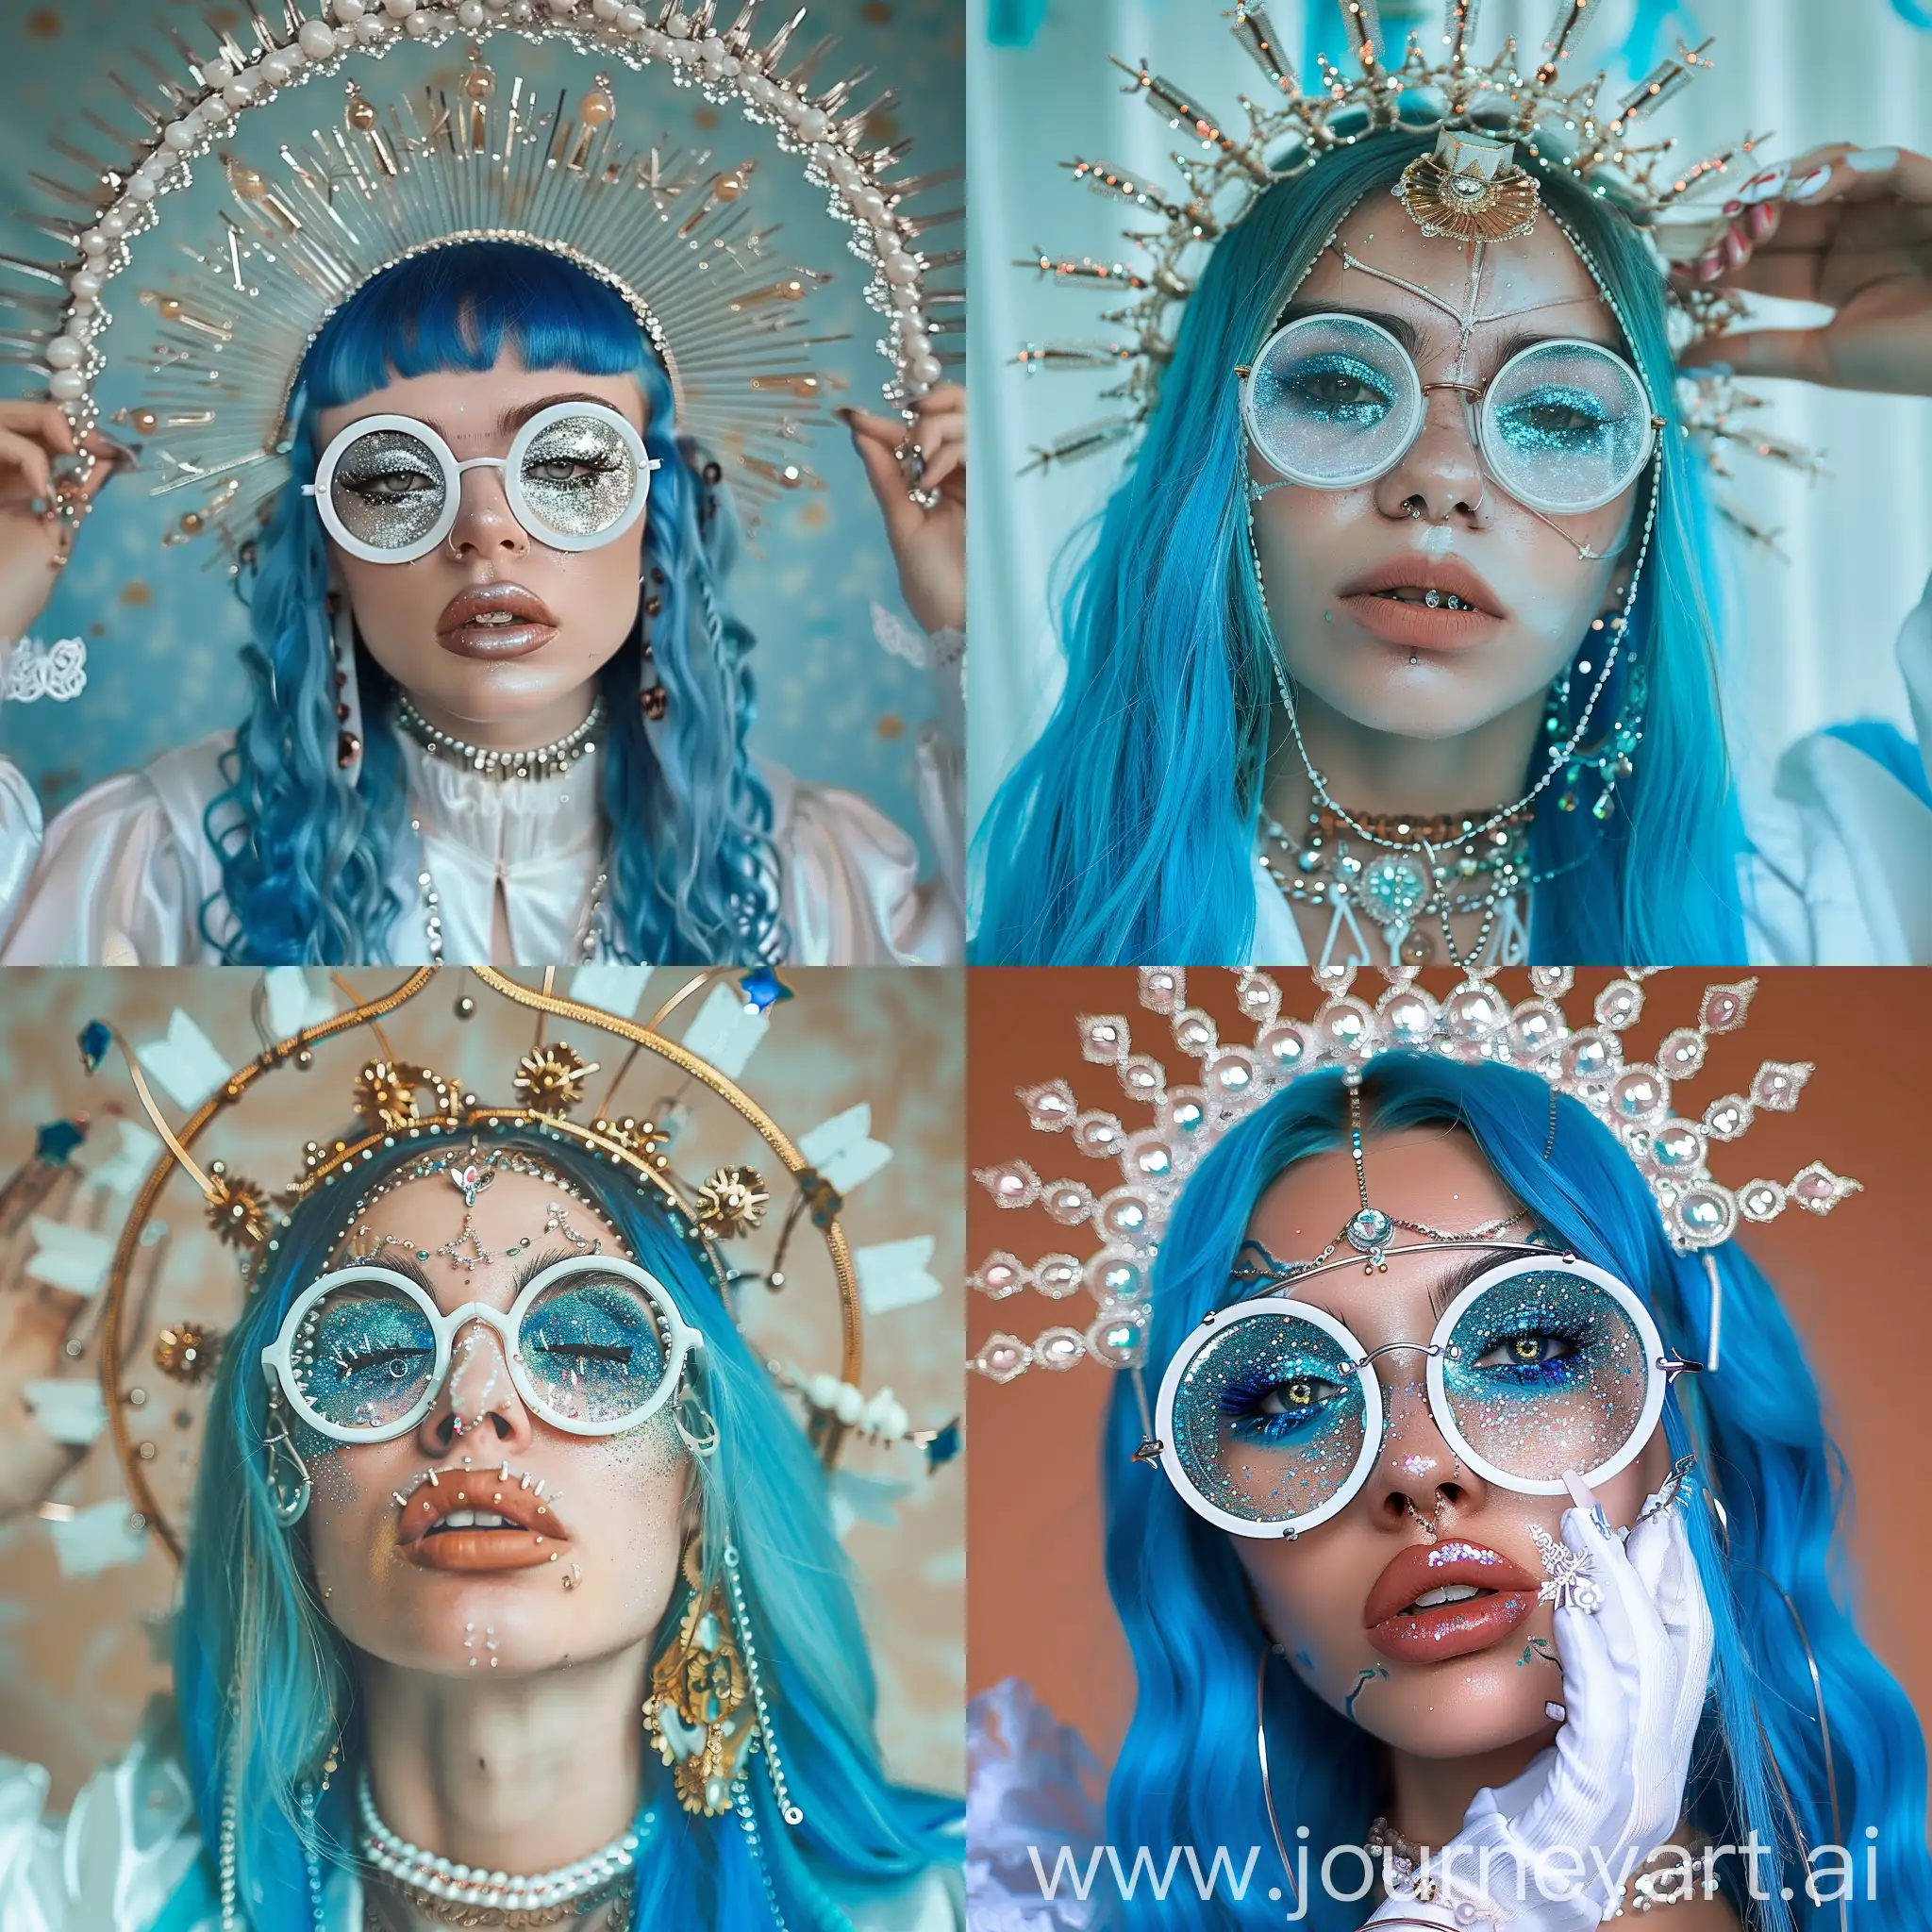 Futuristic-Woman-with-Blue-Hair-and-Glittery-Makeup-in-Zuckerpunk-Style